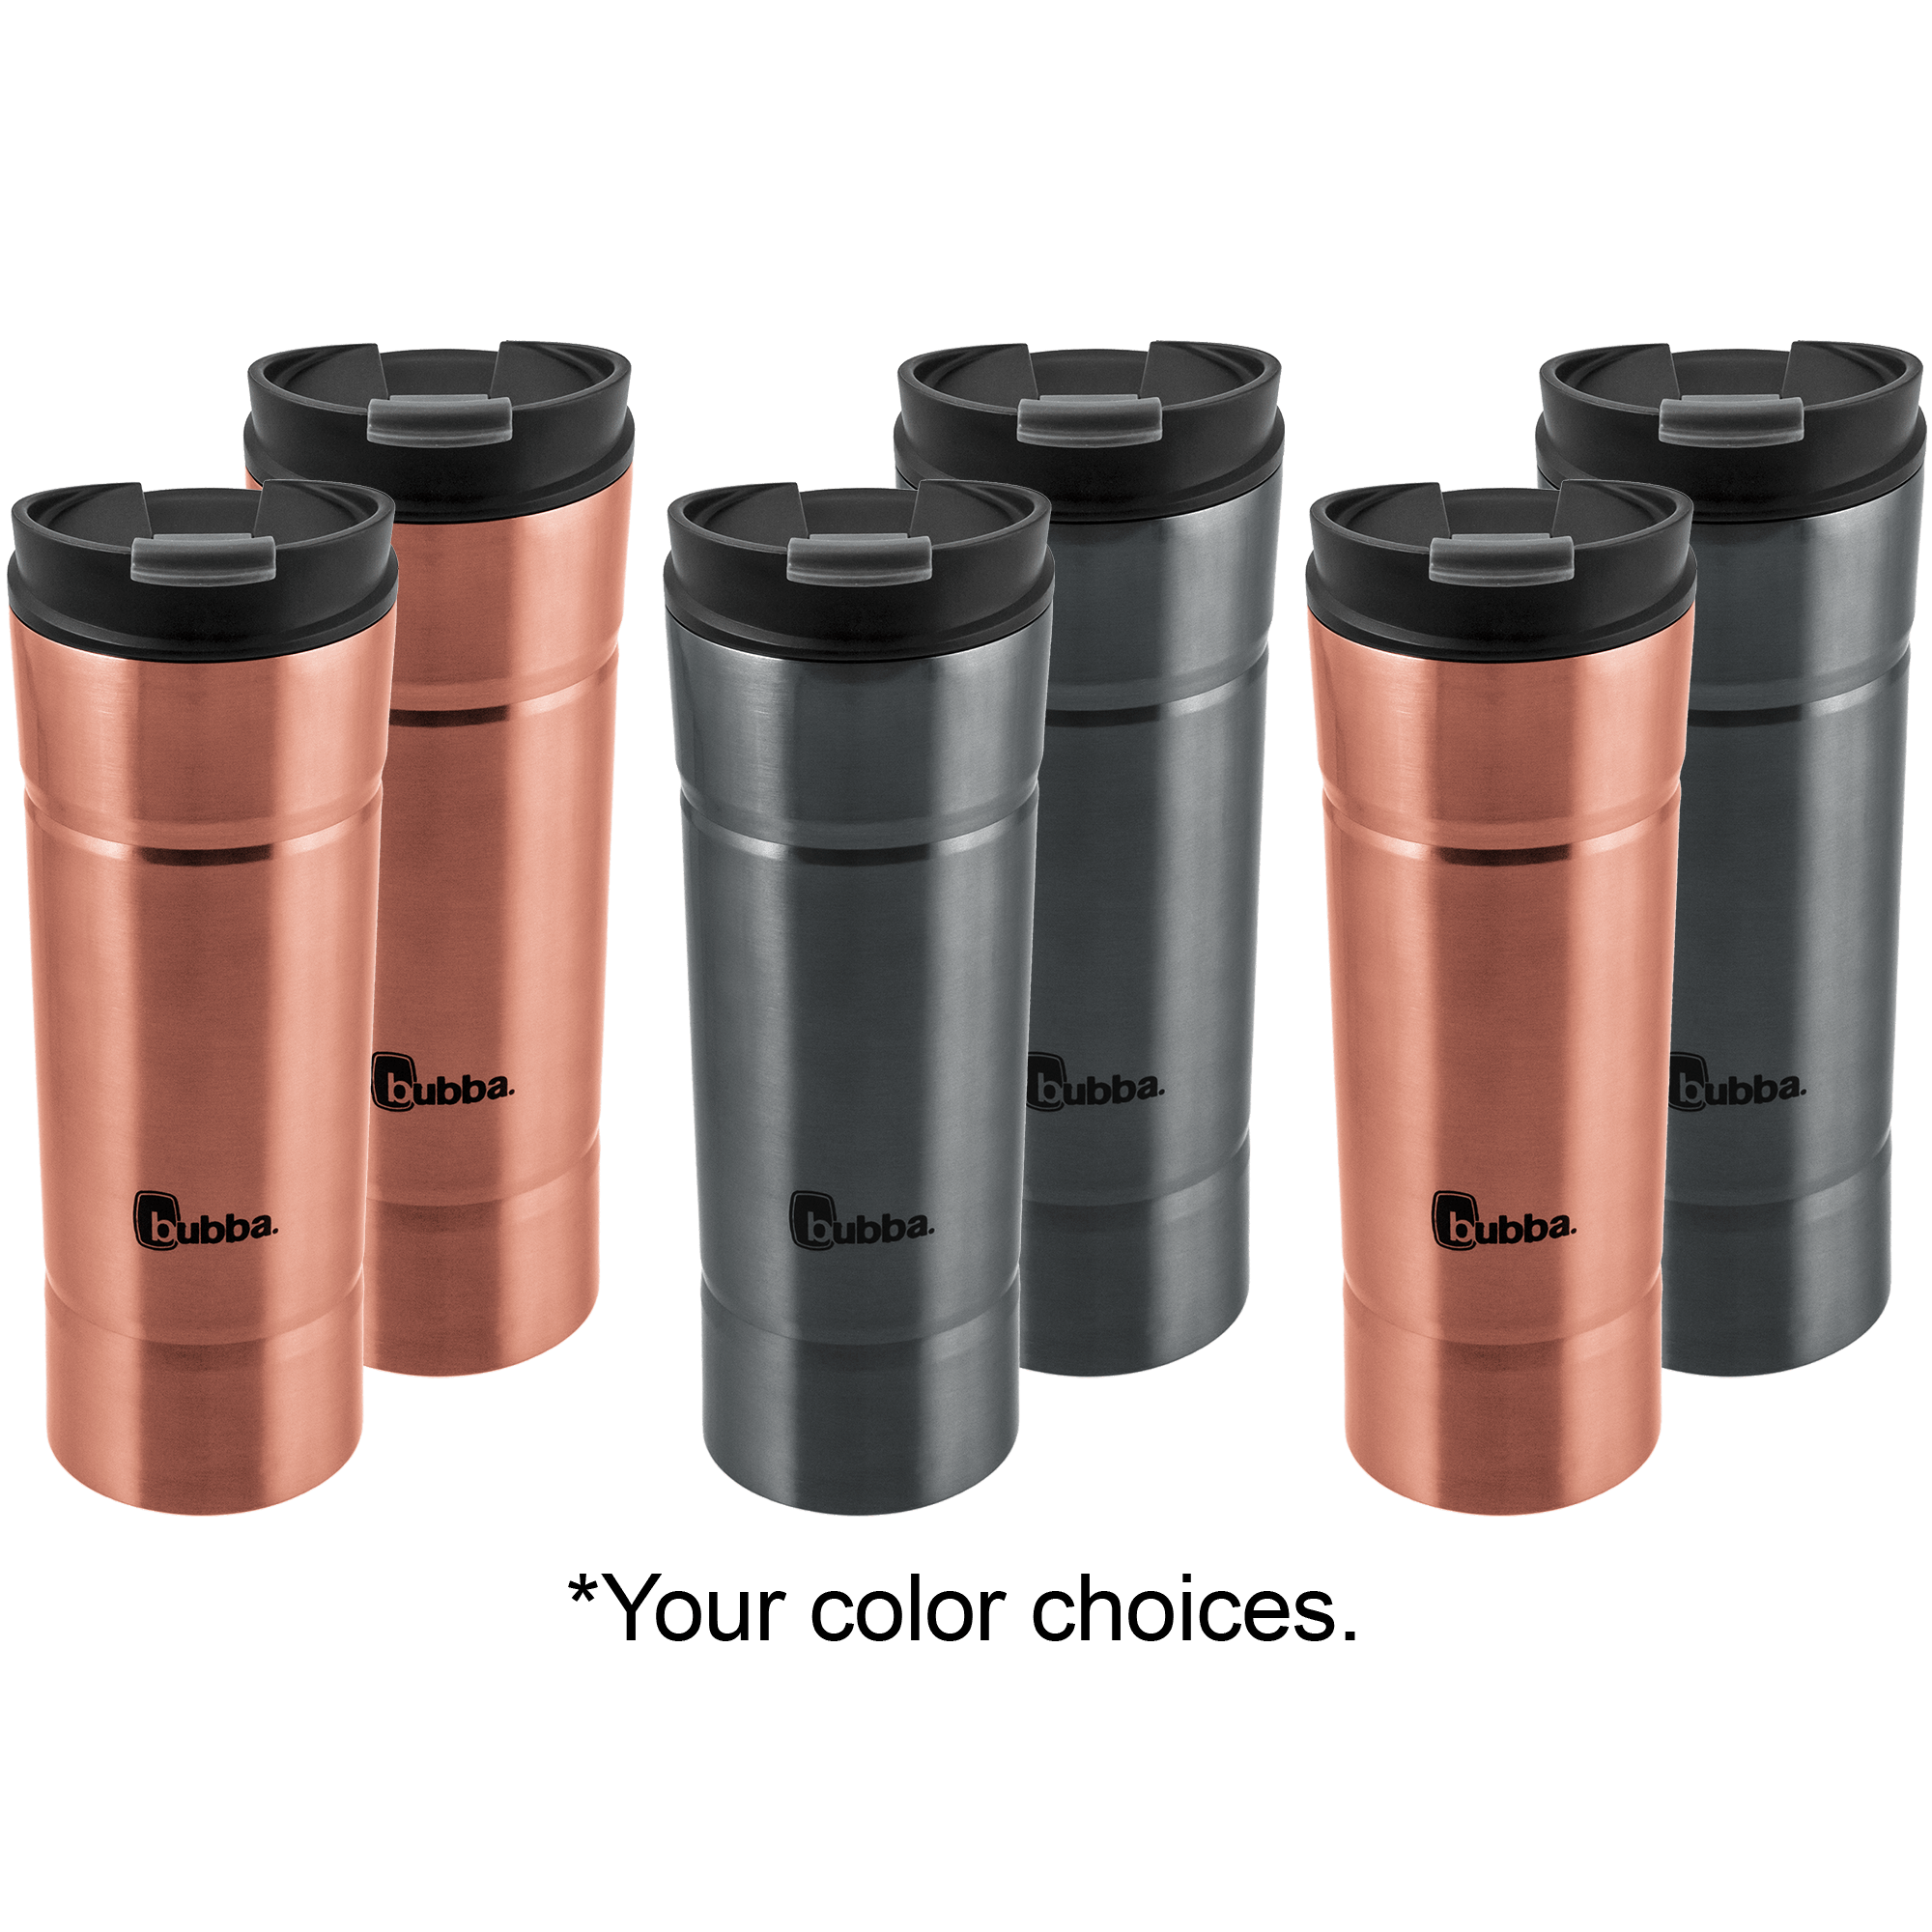 Meh: 2-for-Tuesday: Bubba 24oz Vacuum Insulated Bottles